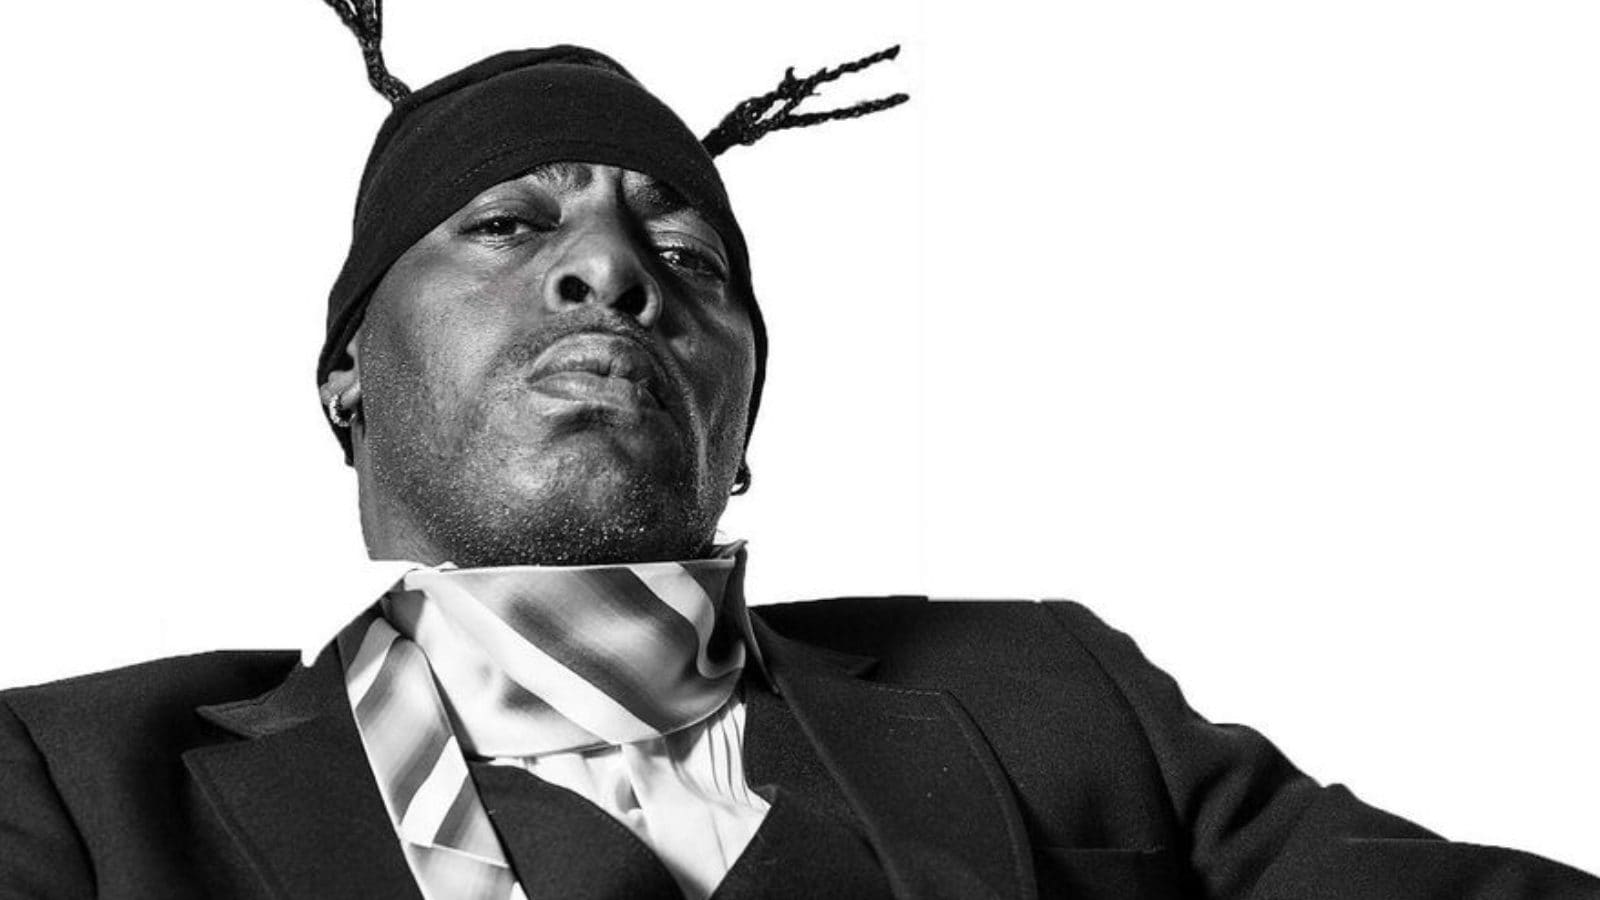 Gangsta's Paradise' rapper Coolio has died after collapsing at friend's  house